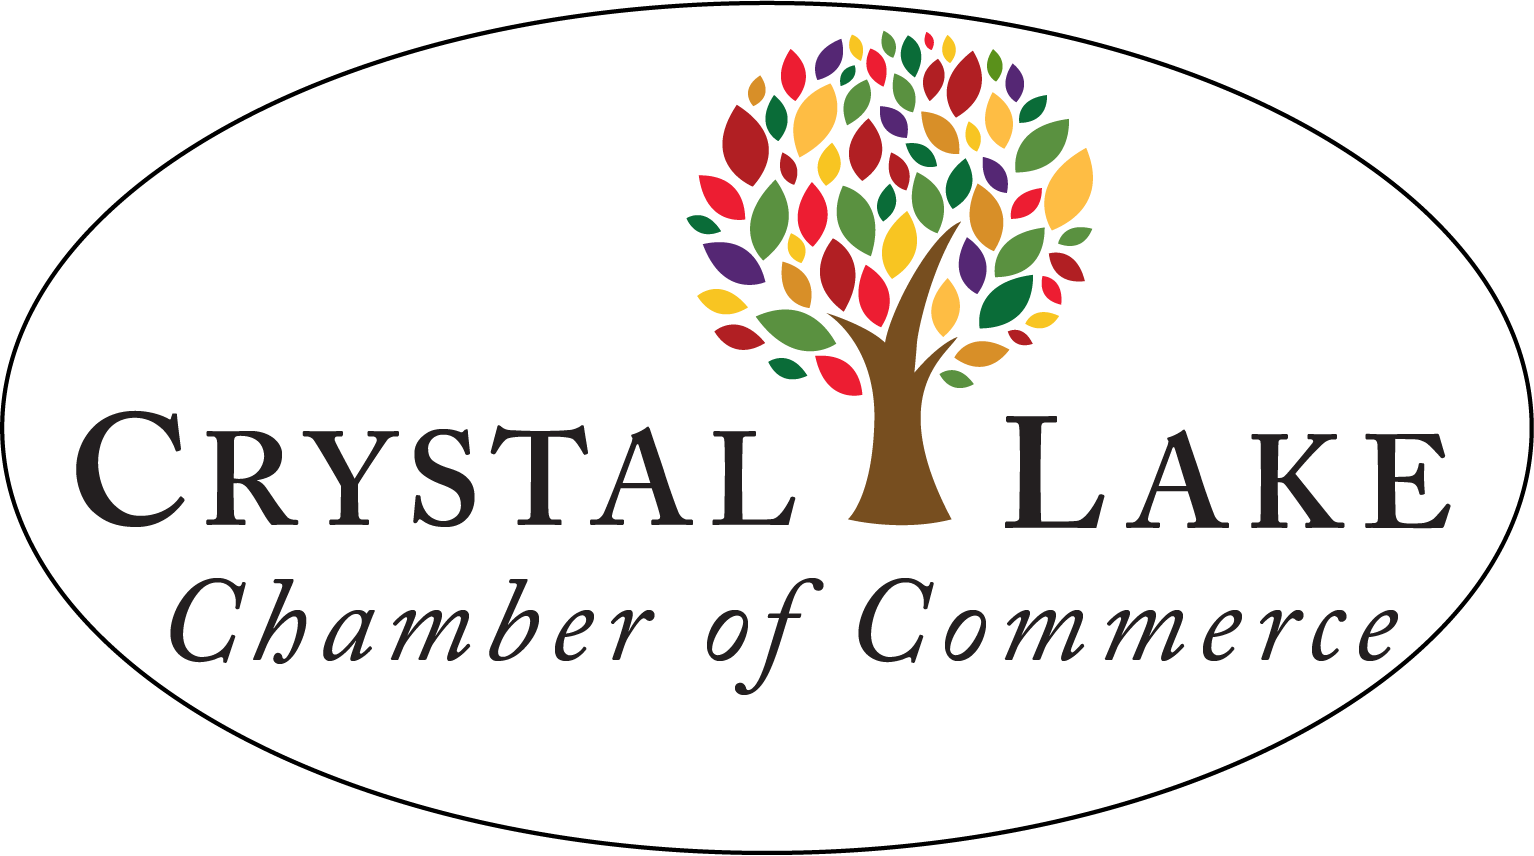 Crystal Lake Chamber of Commerce